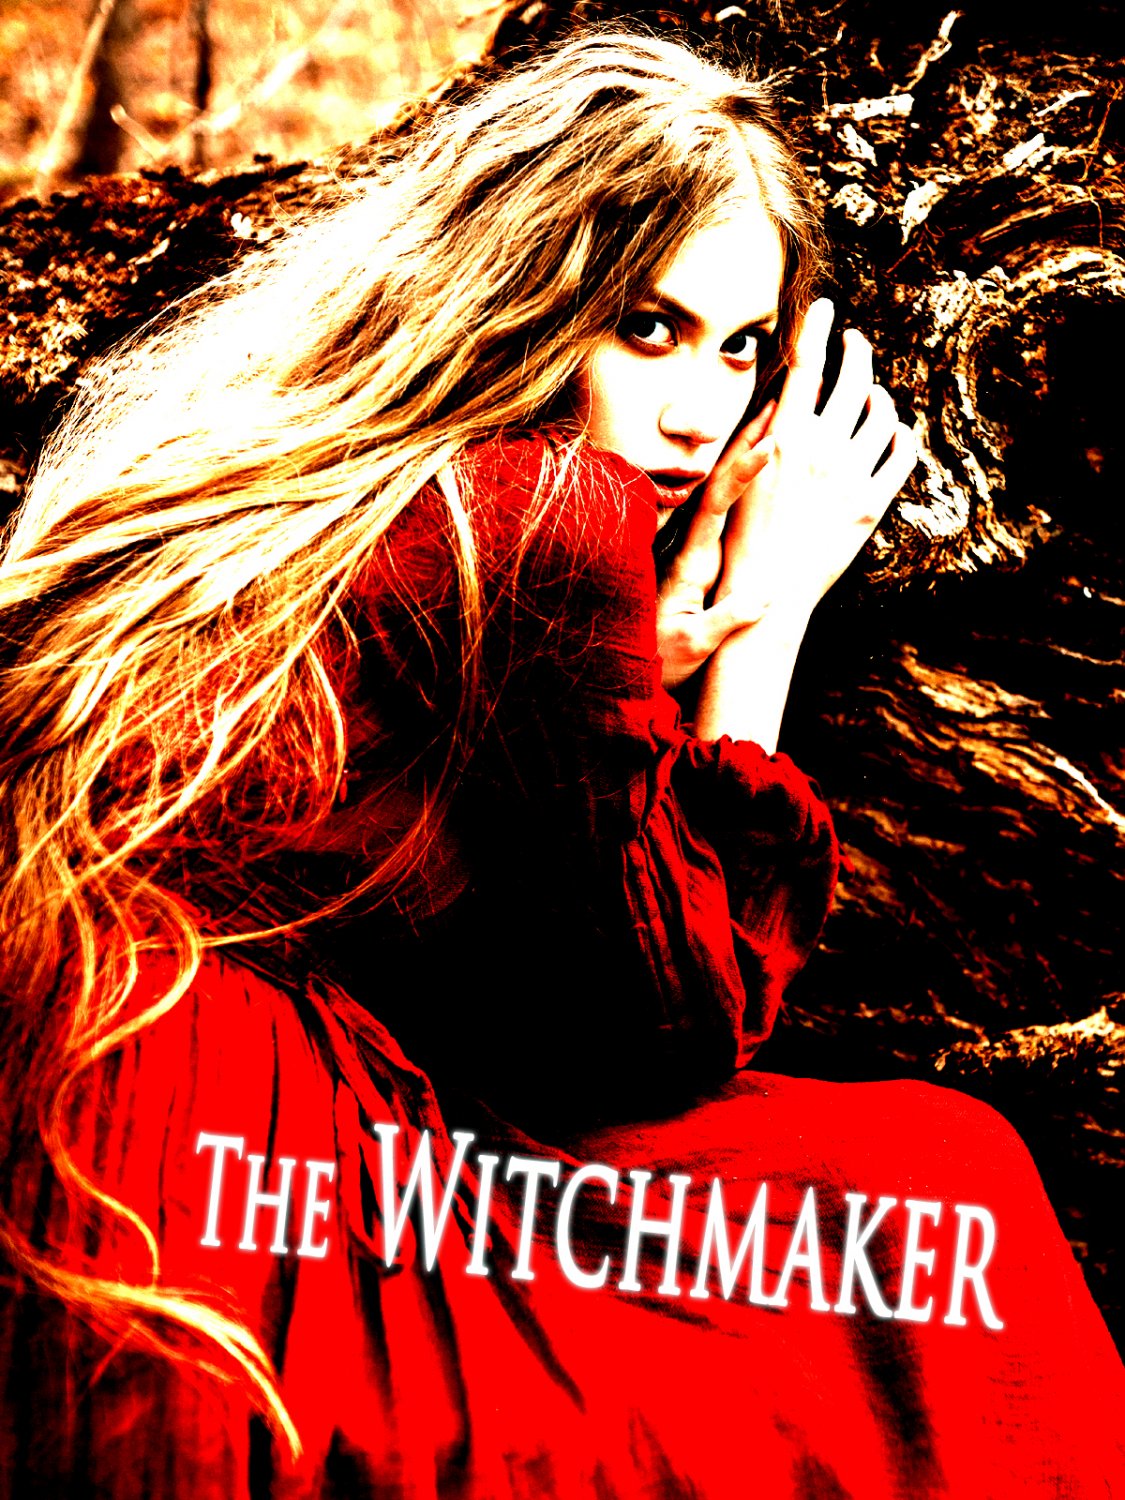 The Witchmaker (DVD)